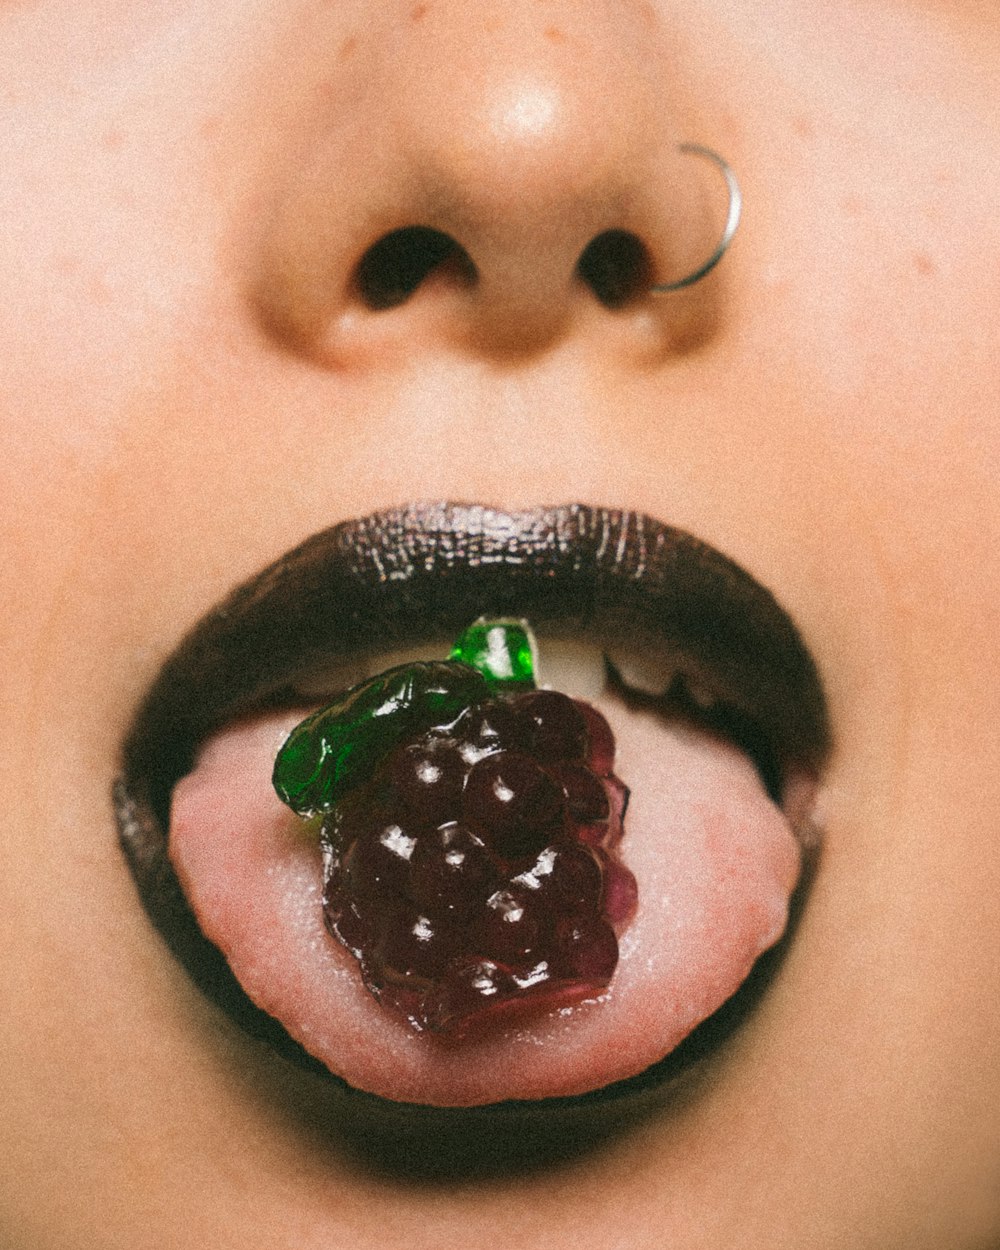 grapes candy on mouth